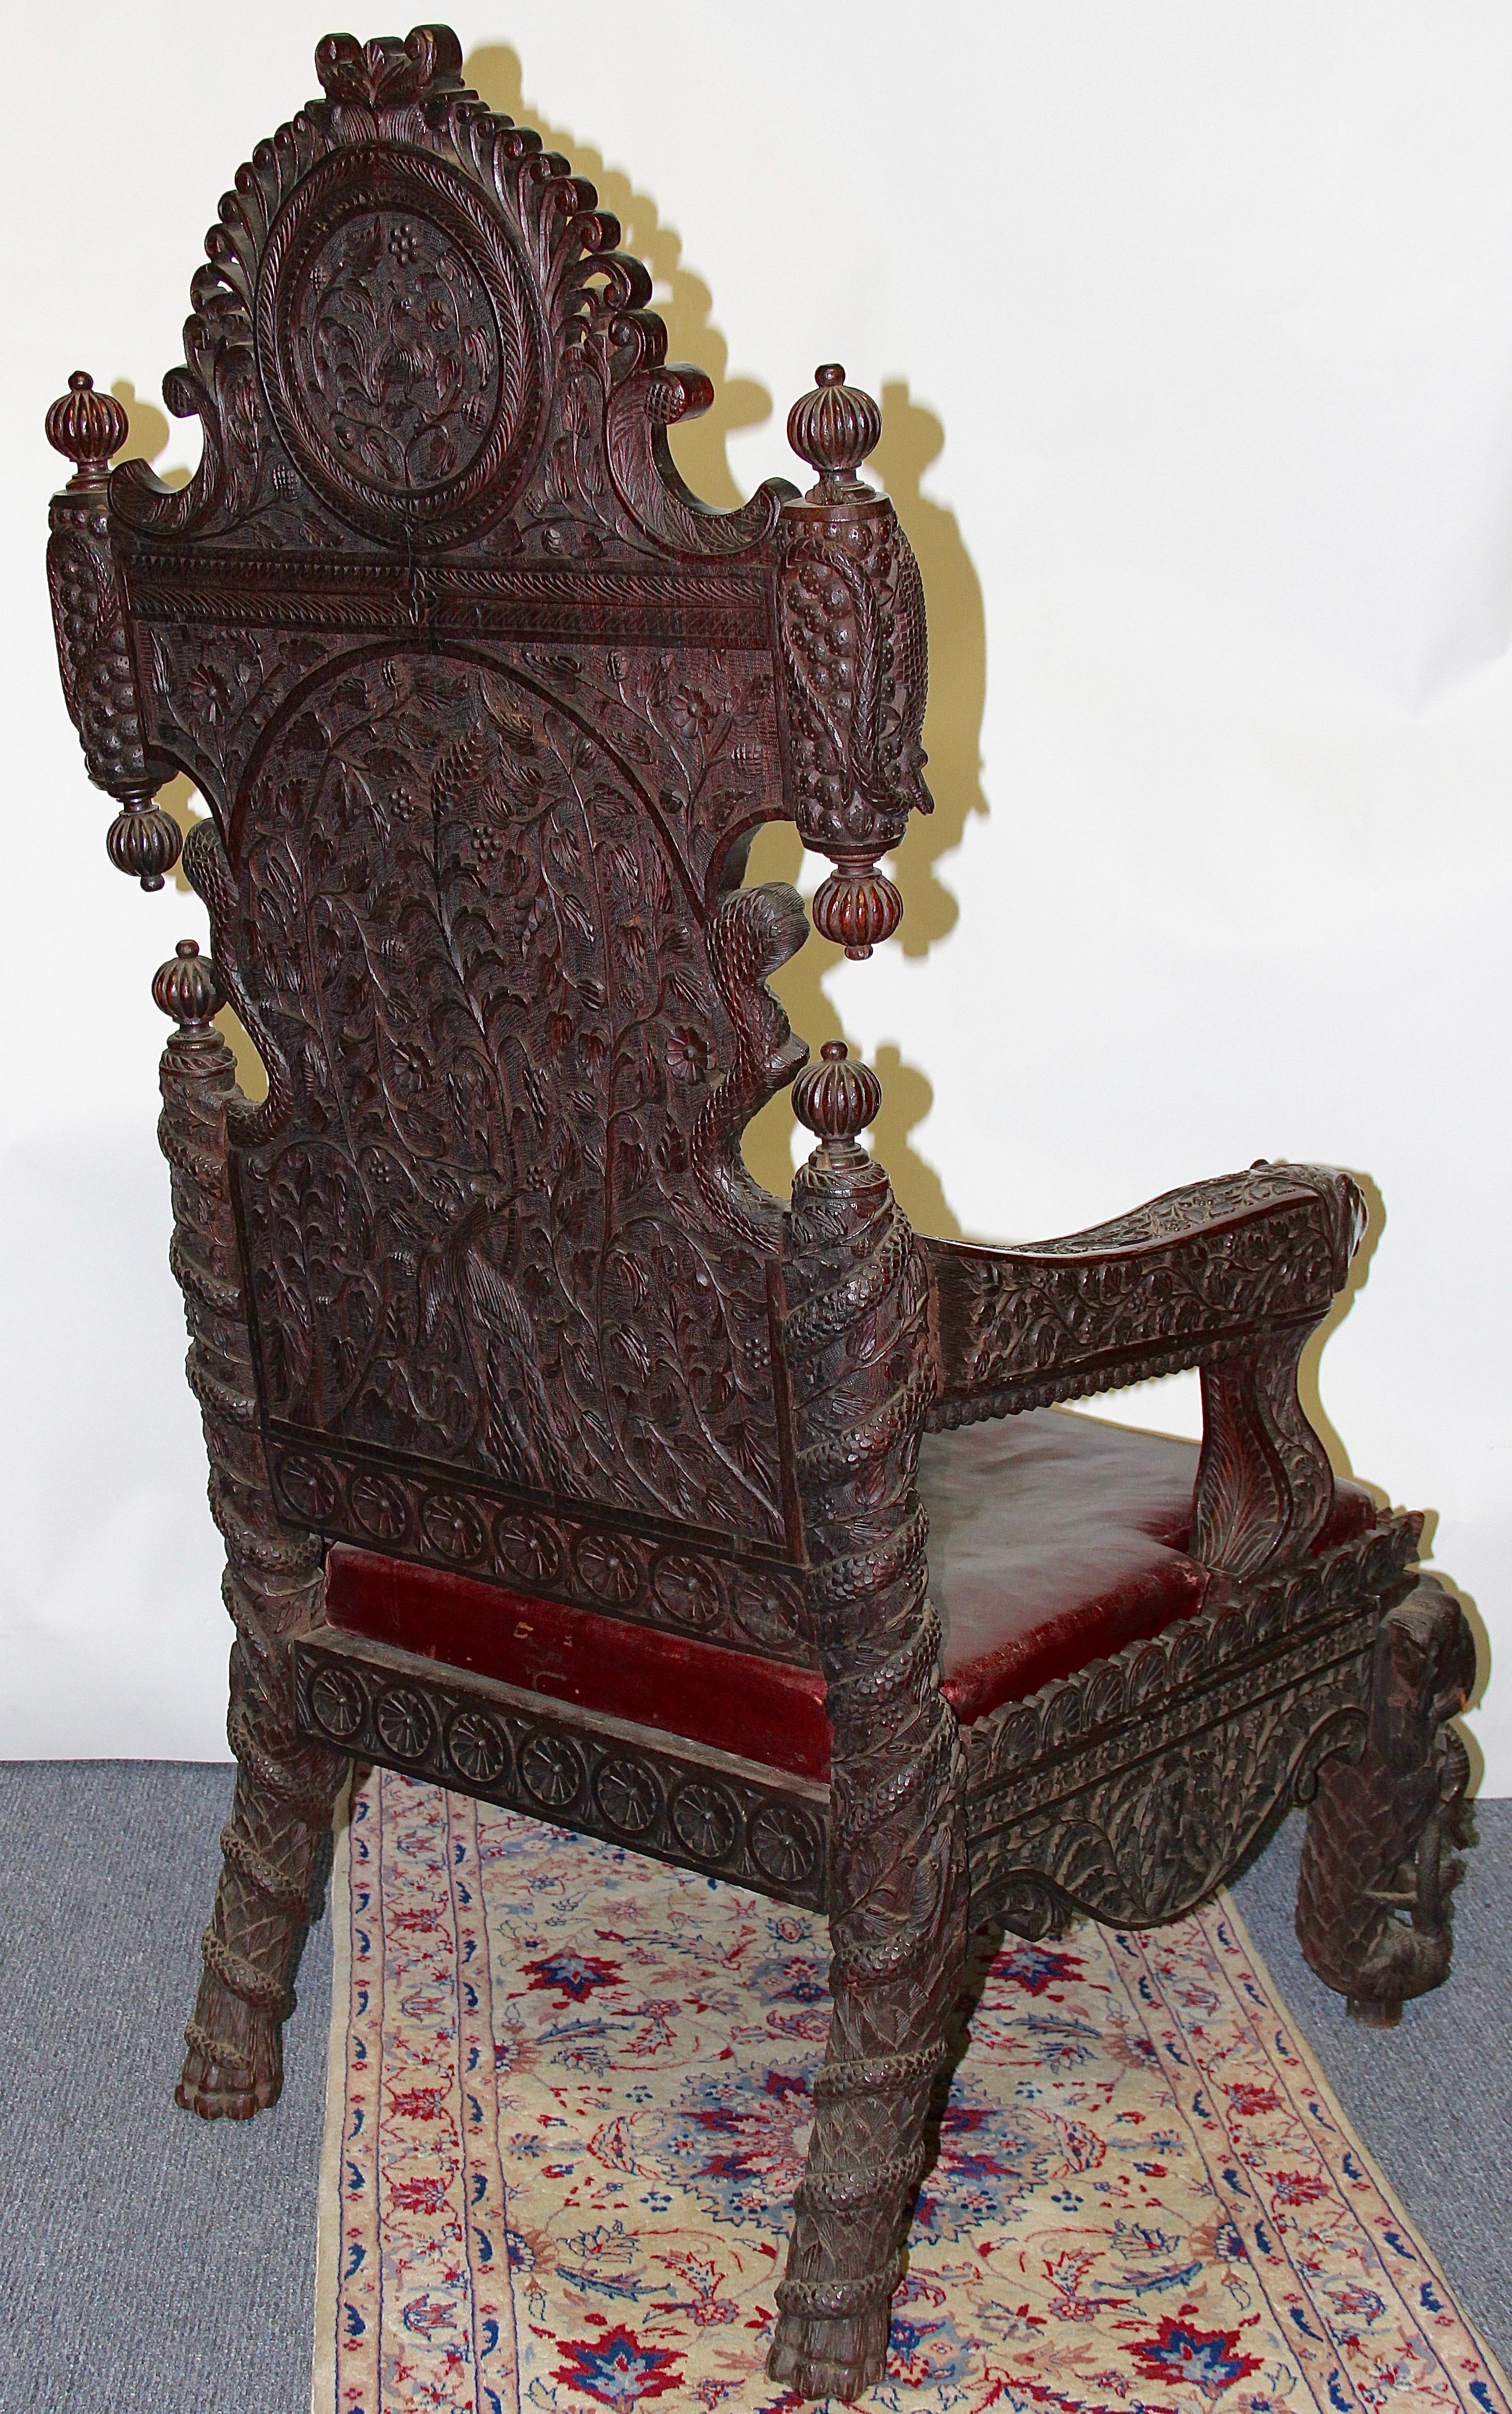 Large and Very Decorative Antique Throne Armchair, 19th Century Solid Wood For Sale 6